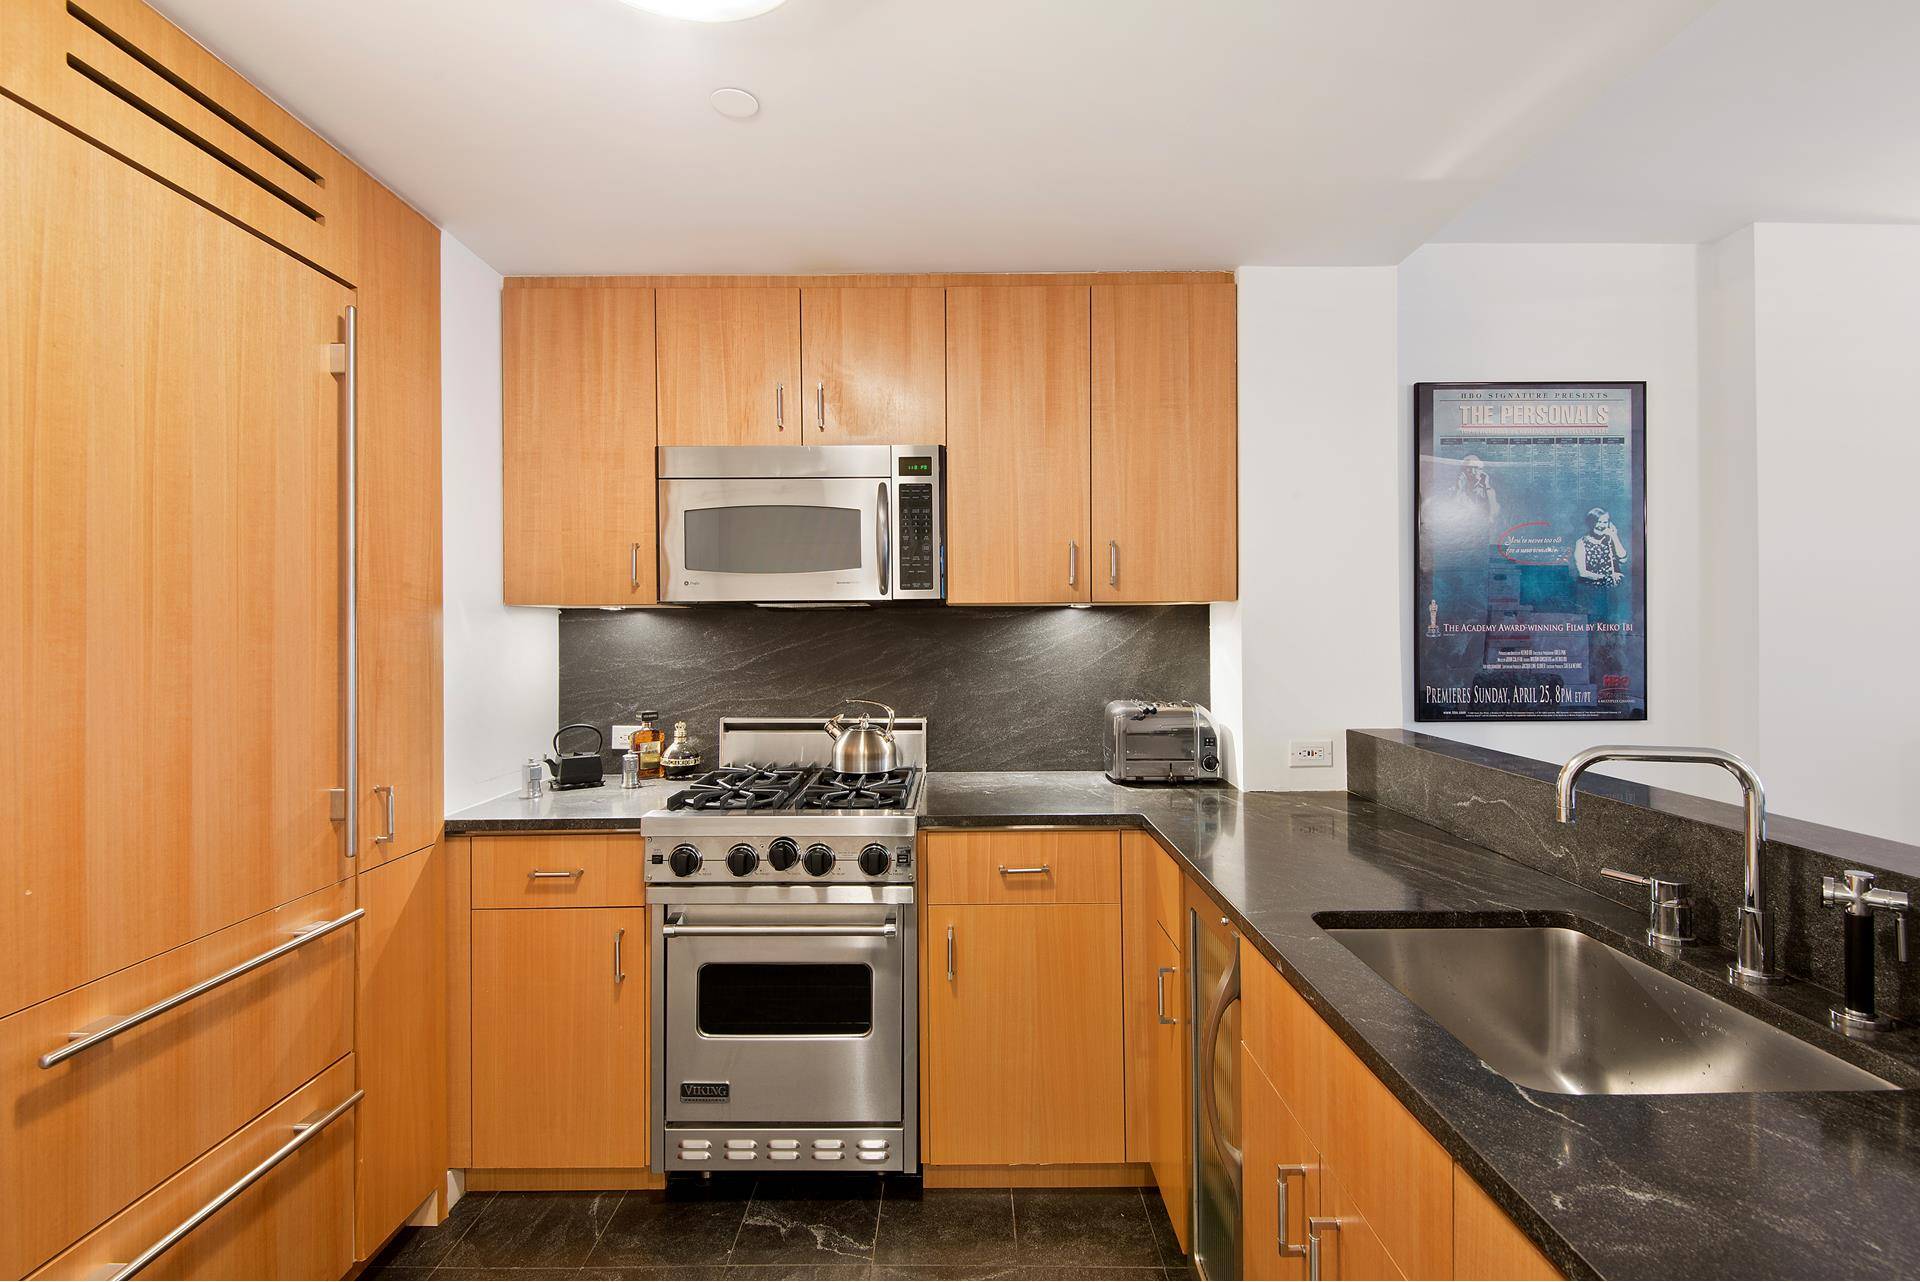 THE WINDSOR PARK by Gwathmey amp ; Siegel Apartment features This finely appointed Home offers a lovely entry foyer that opens to a large living room, dining room and kitchen ...